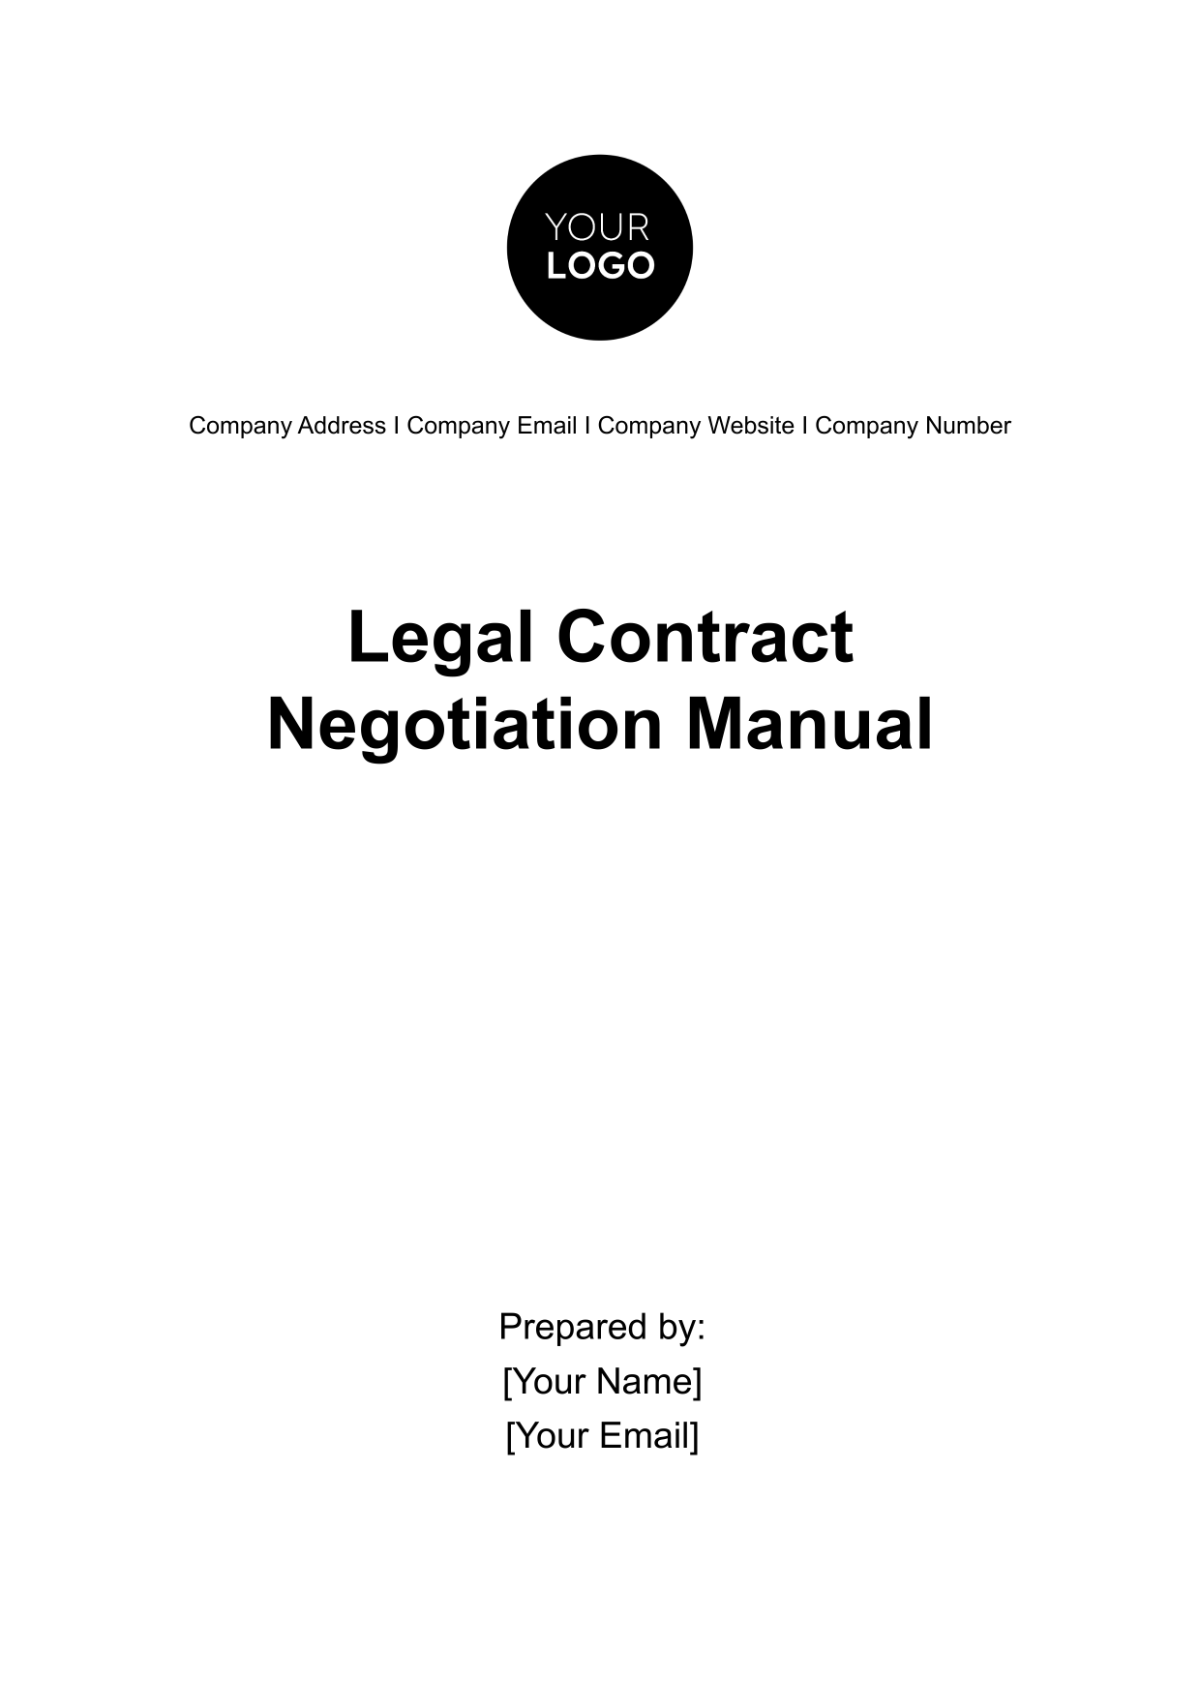 Legal Contract Negotiation Manual Template